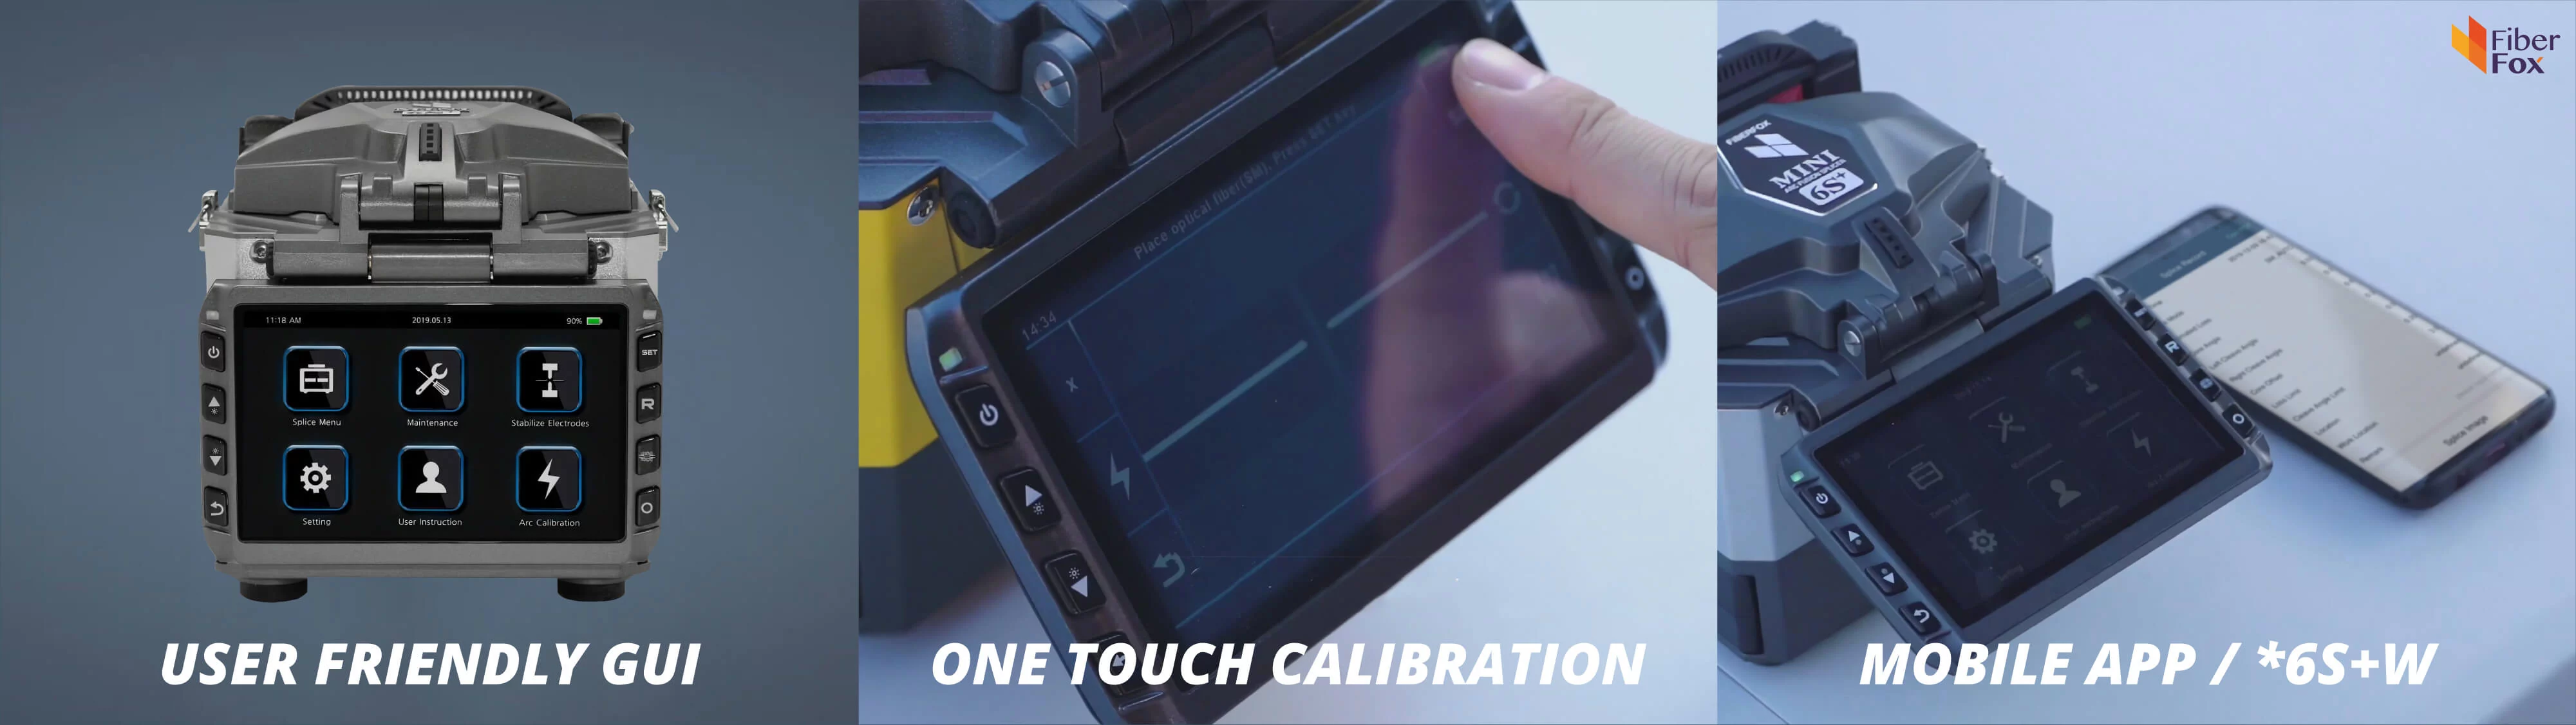 FiberFox Fusion Splicer Devices' Usability - User Friendly GUI - One Touch Calibration - 6S+W Mobile App